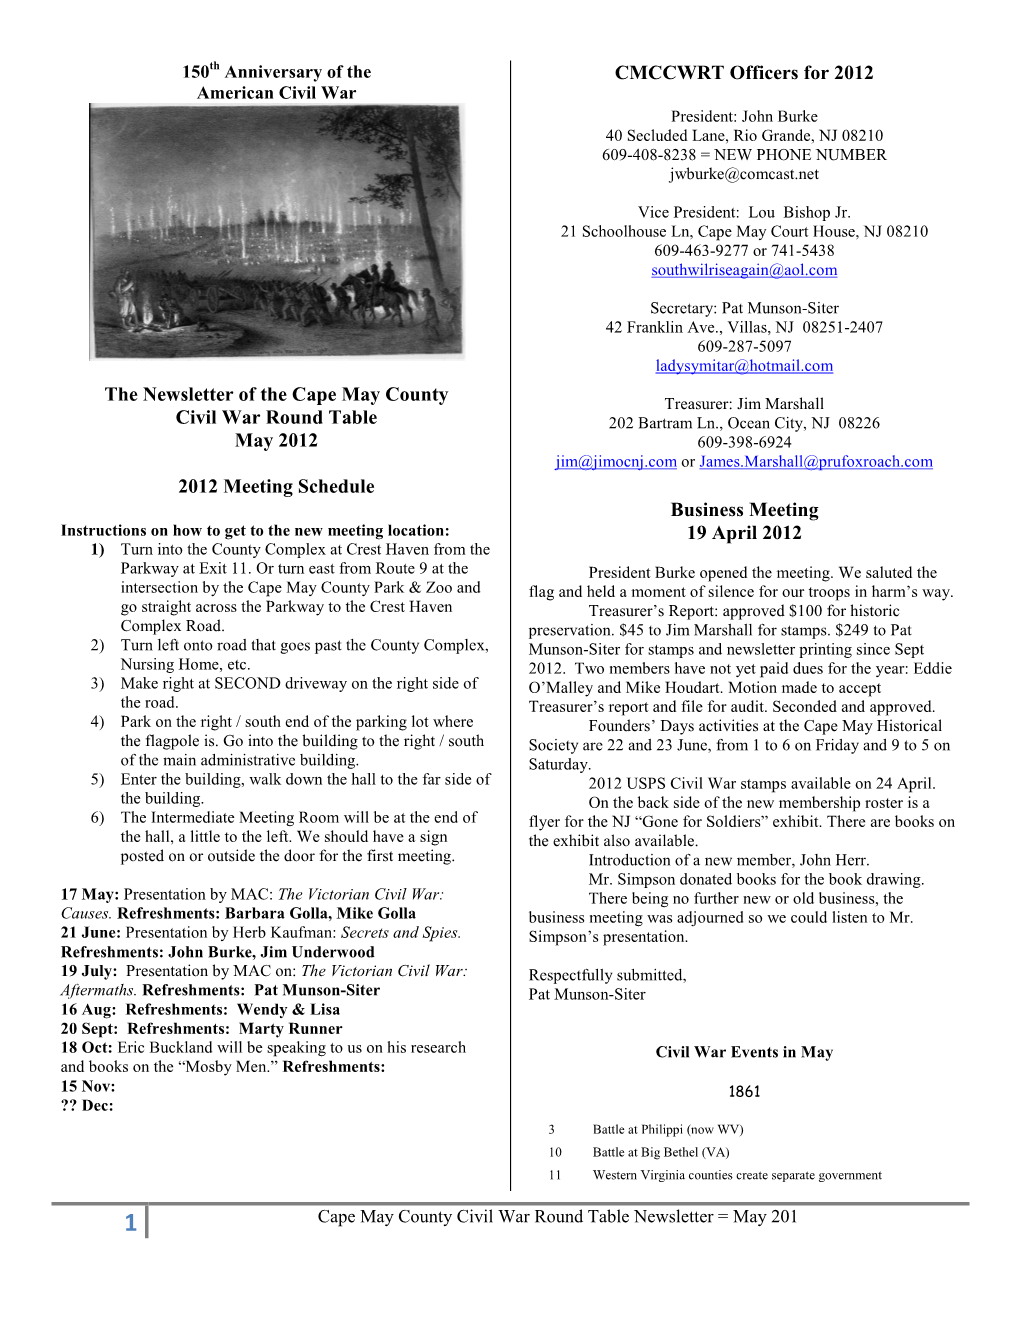 The Newsletter of the Cape May County Civil War Round Table May